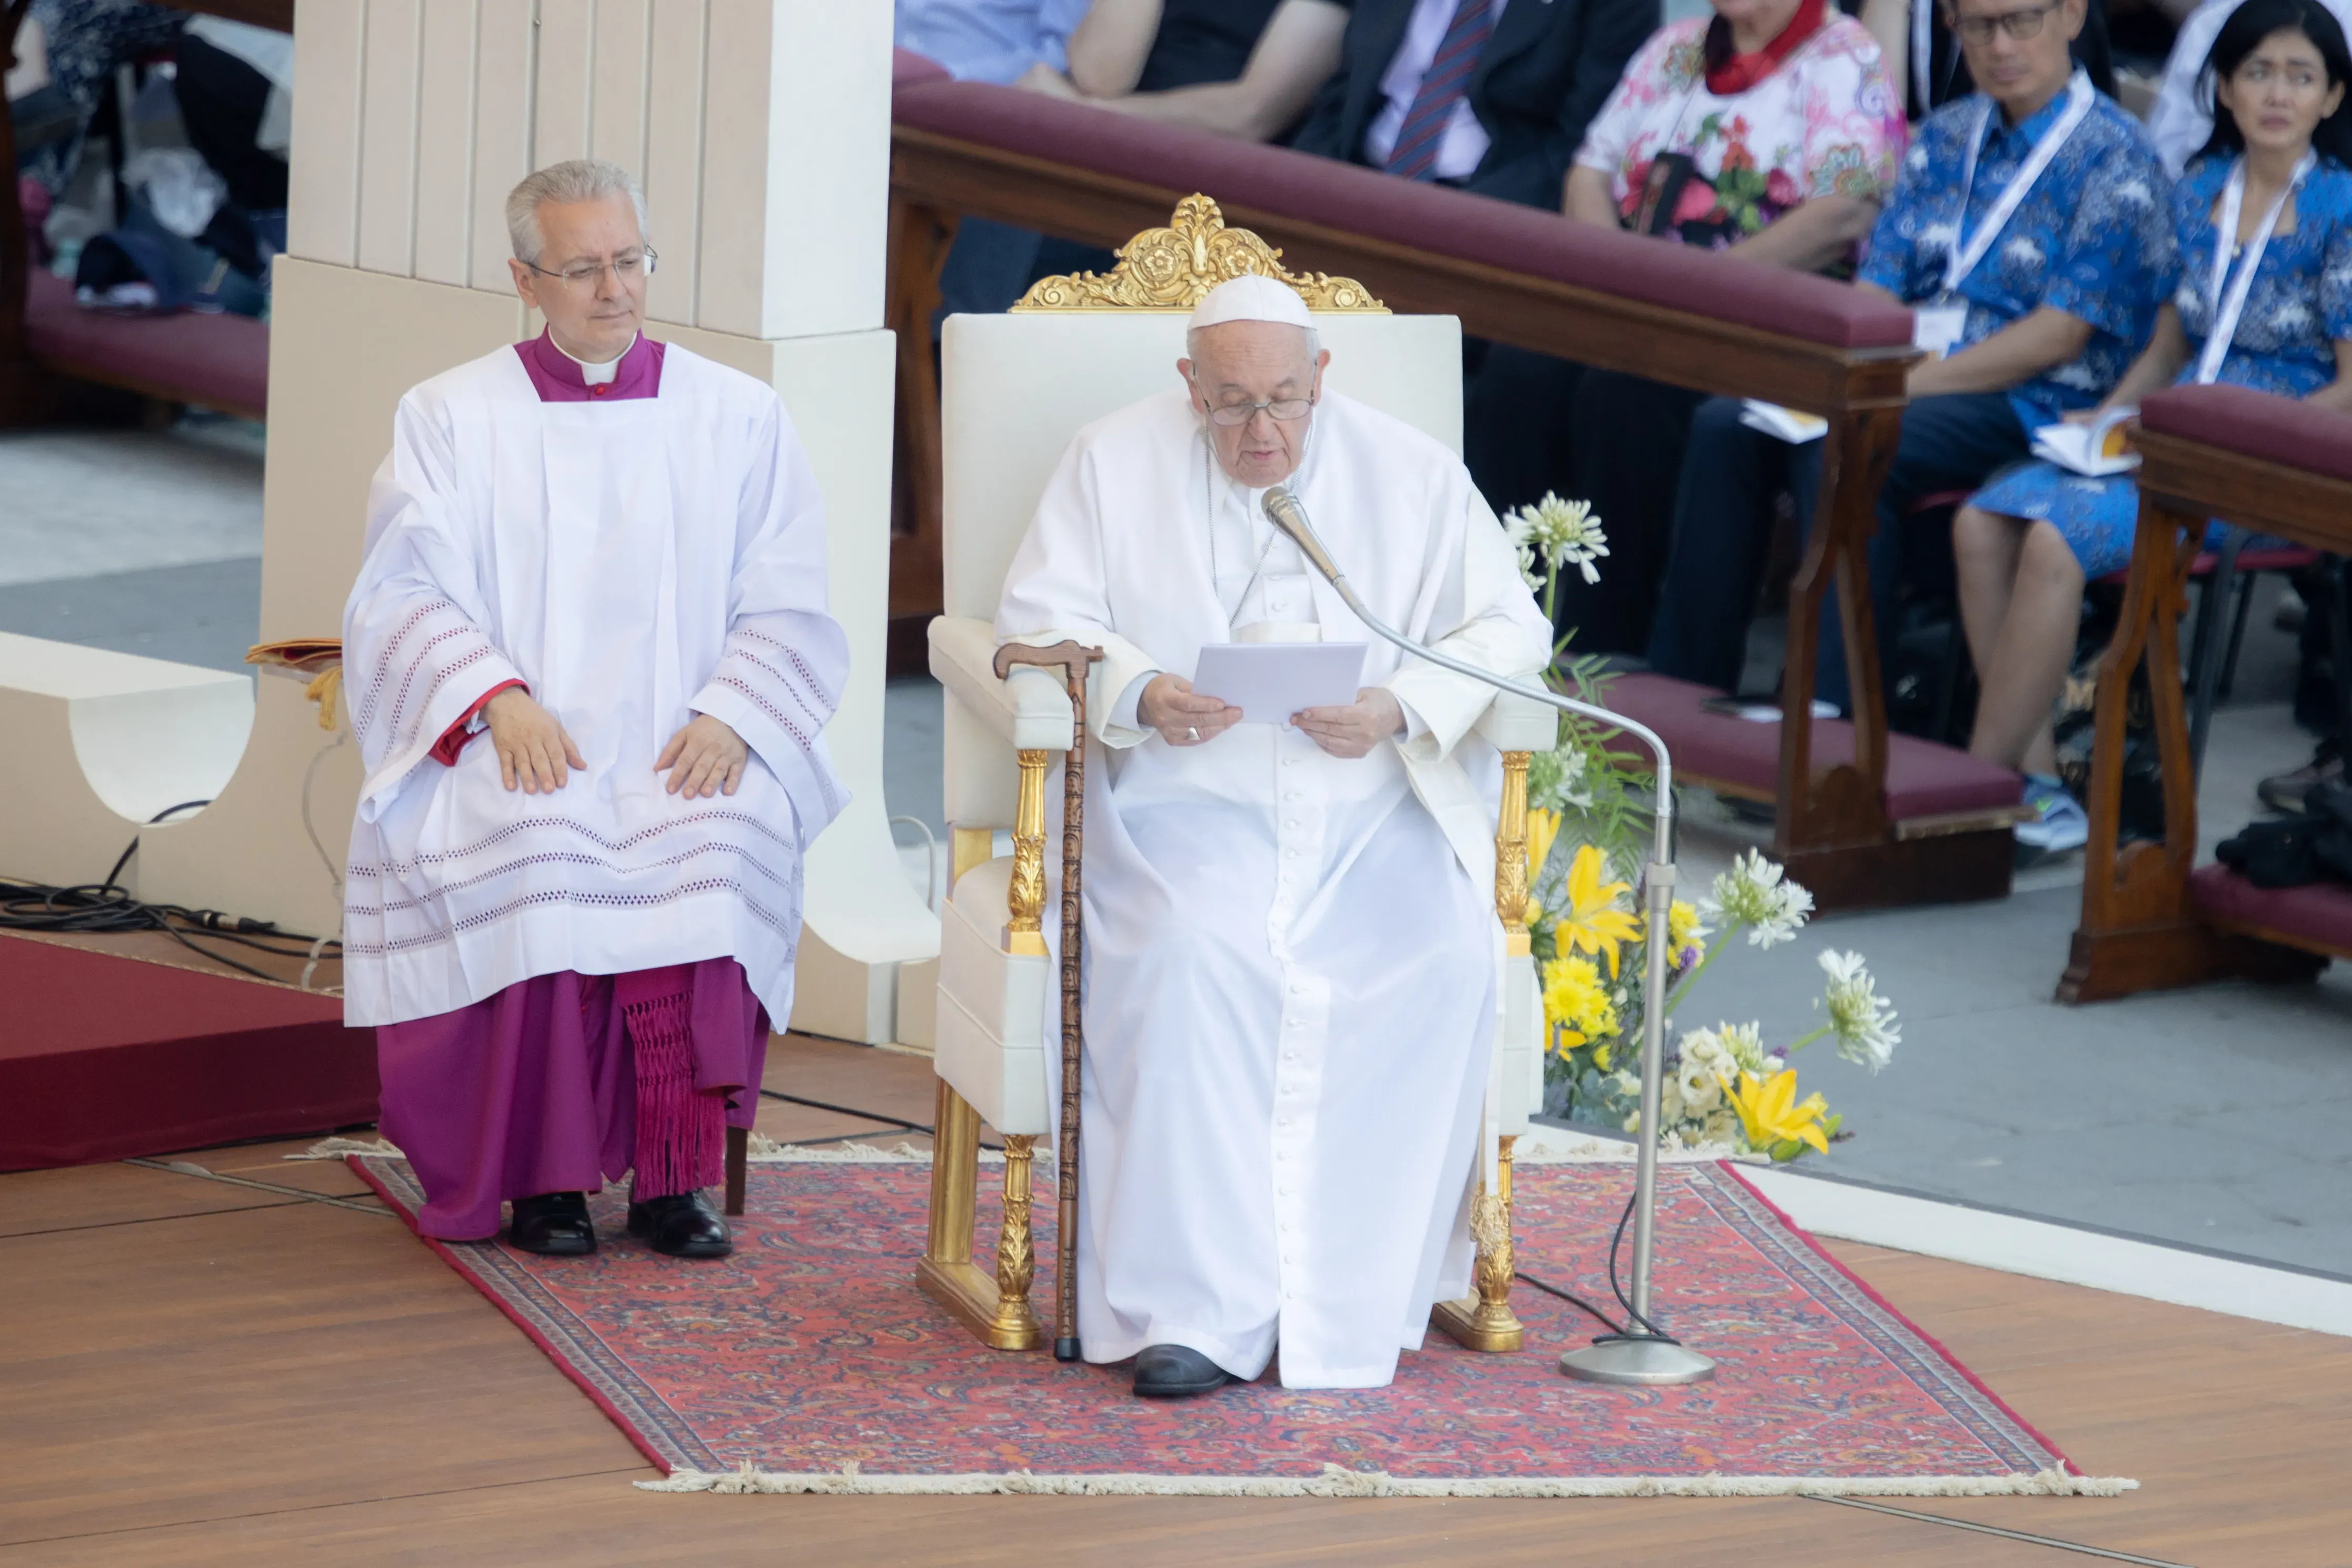 Pope Francis at Mass for the World Meeting of Families 2022 in St. Peter's Square. Daniel Ibanez/CNA